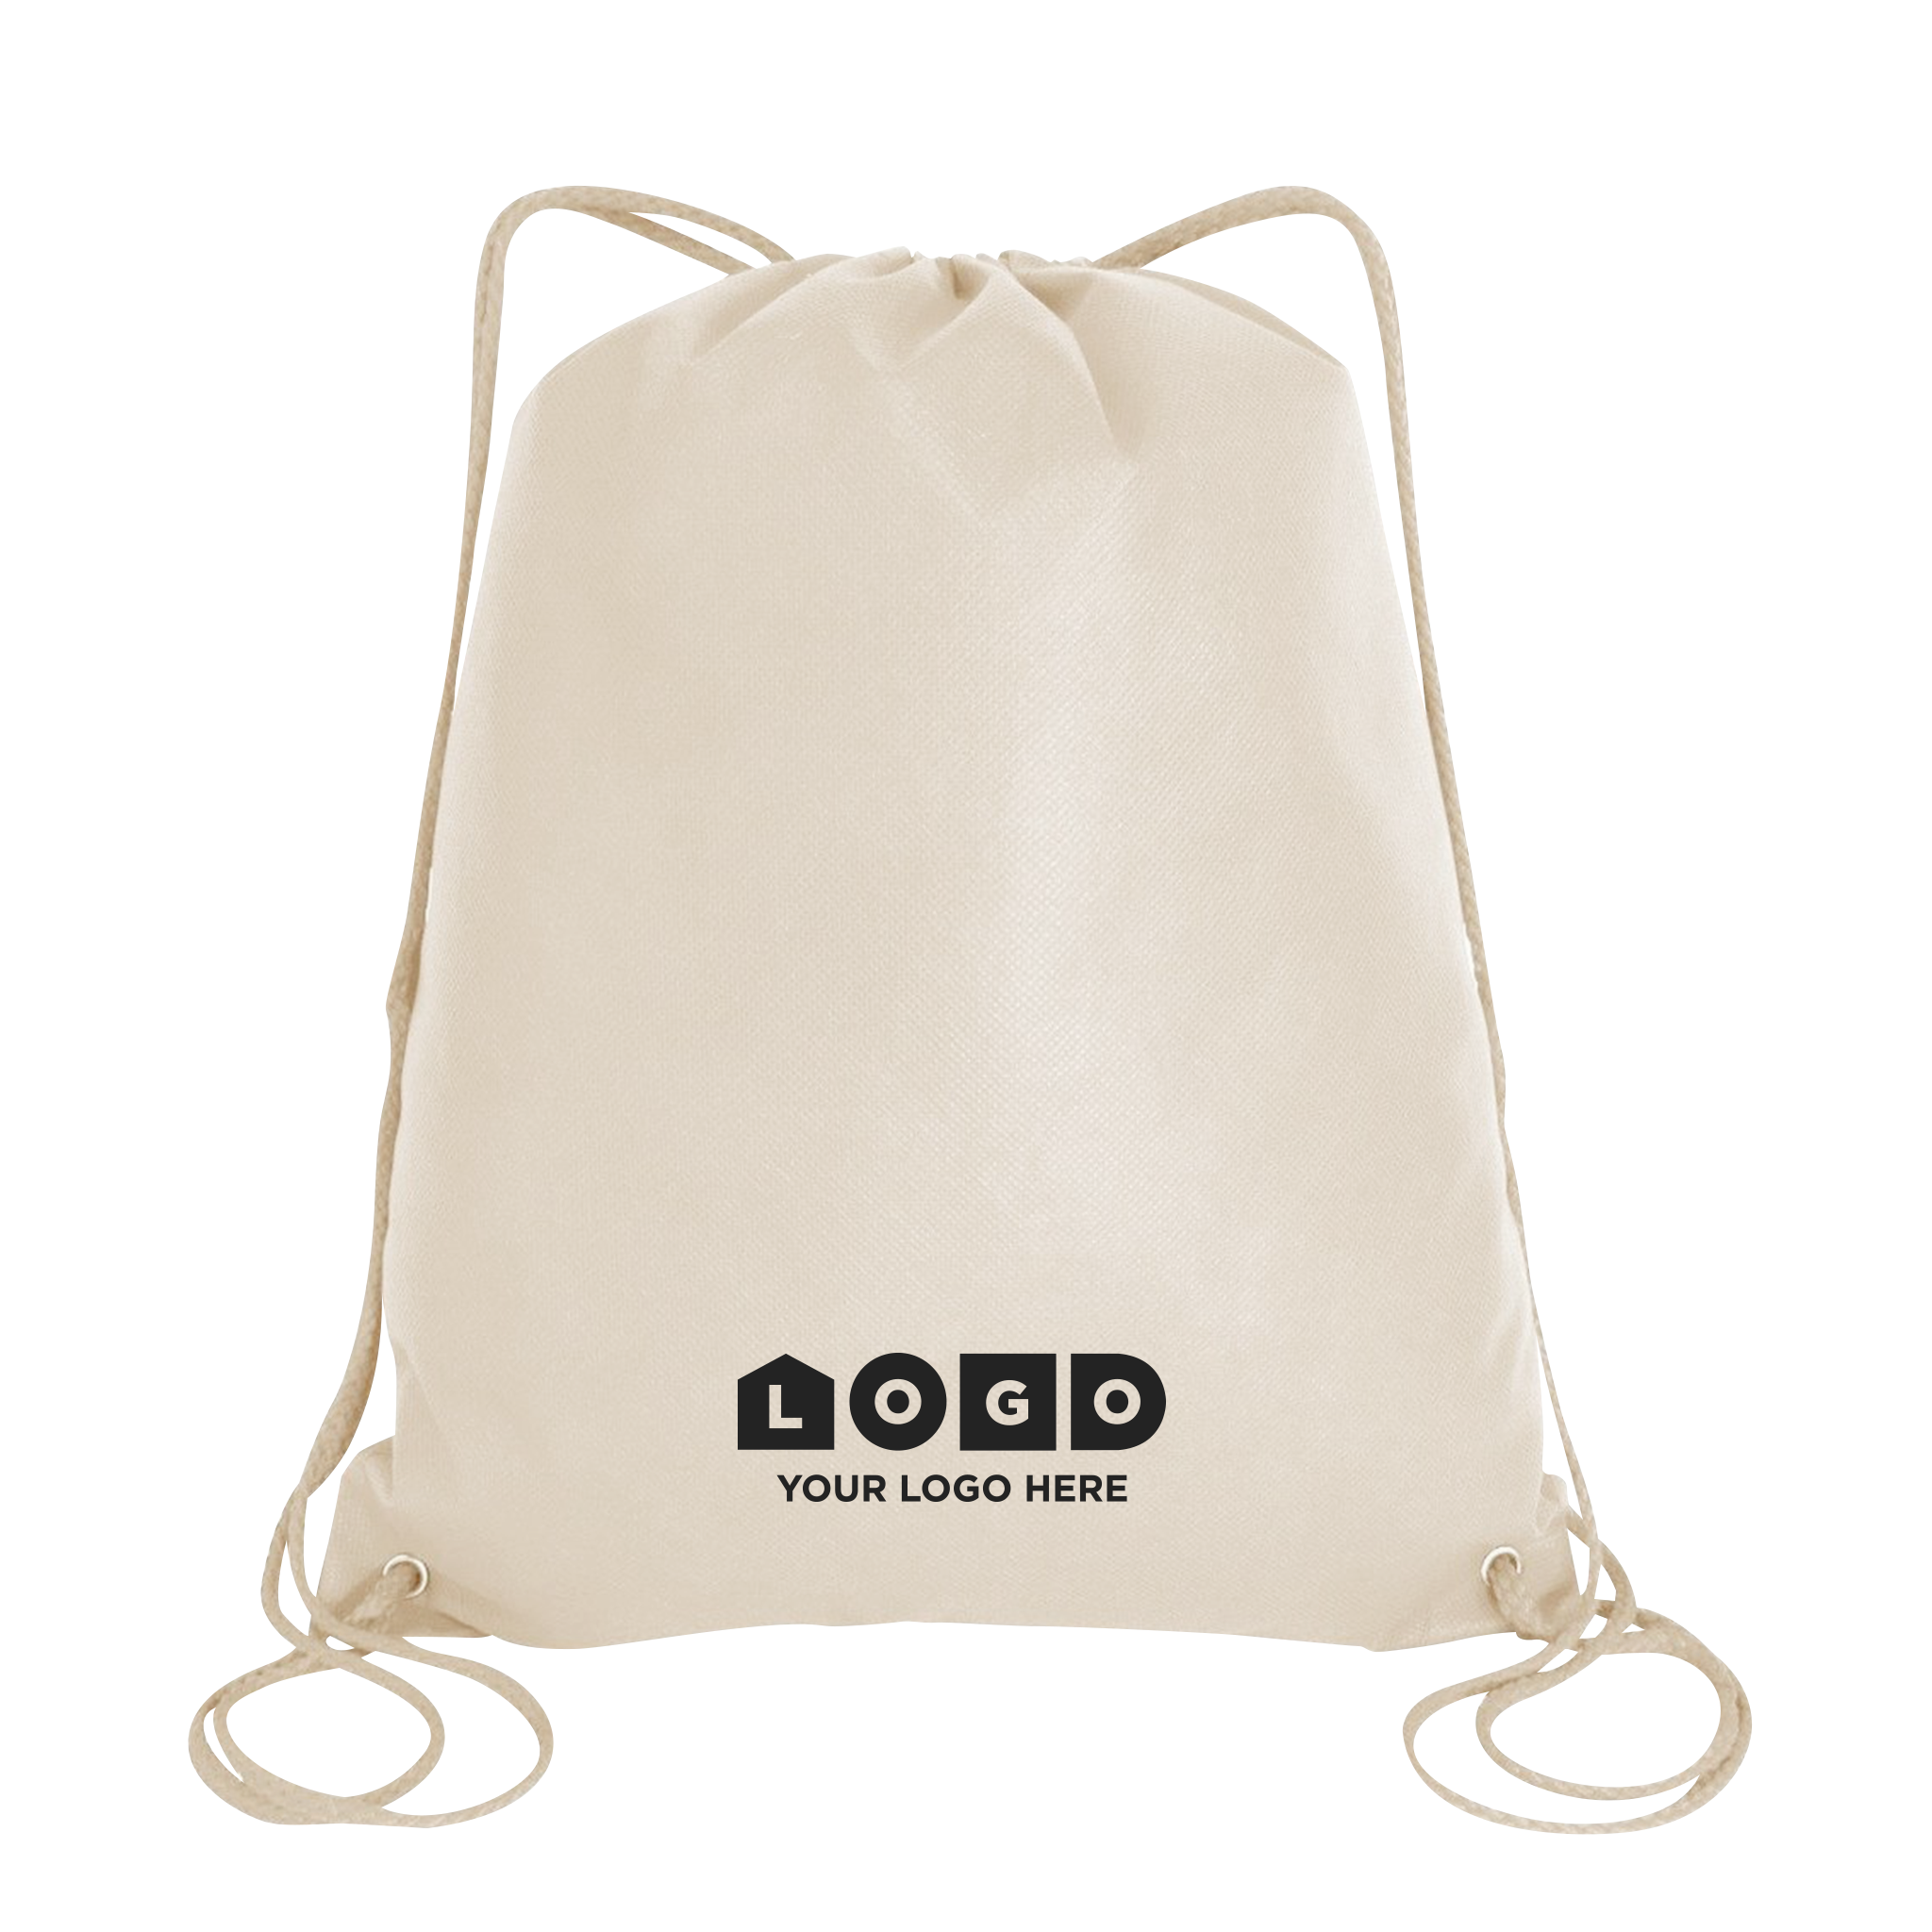 Black Cotton Drawstring Bags  Stock Black Cotton Drawstring Bags Available  Next Working Day